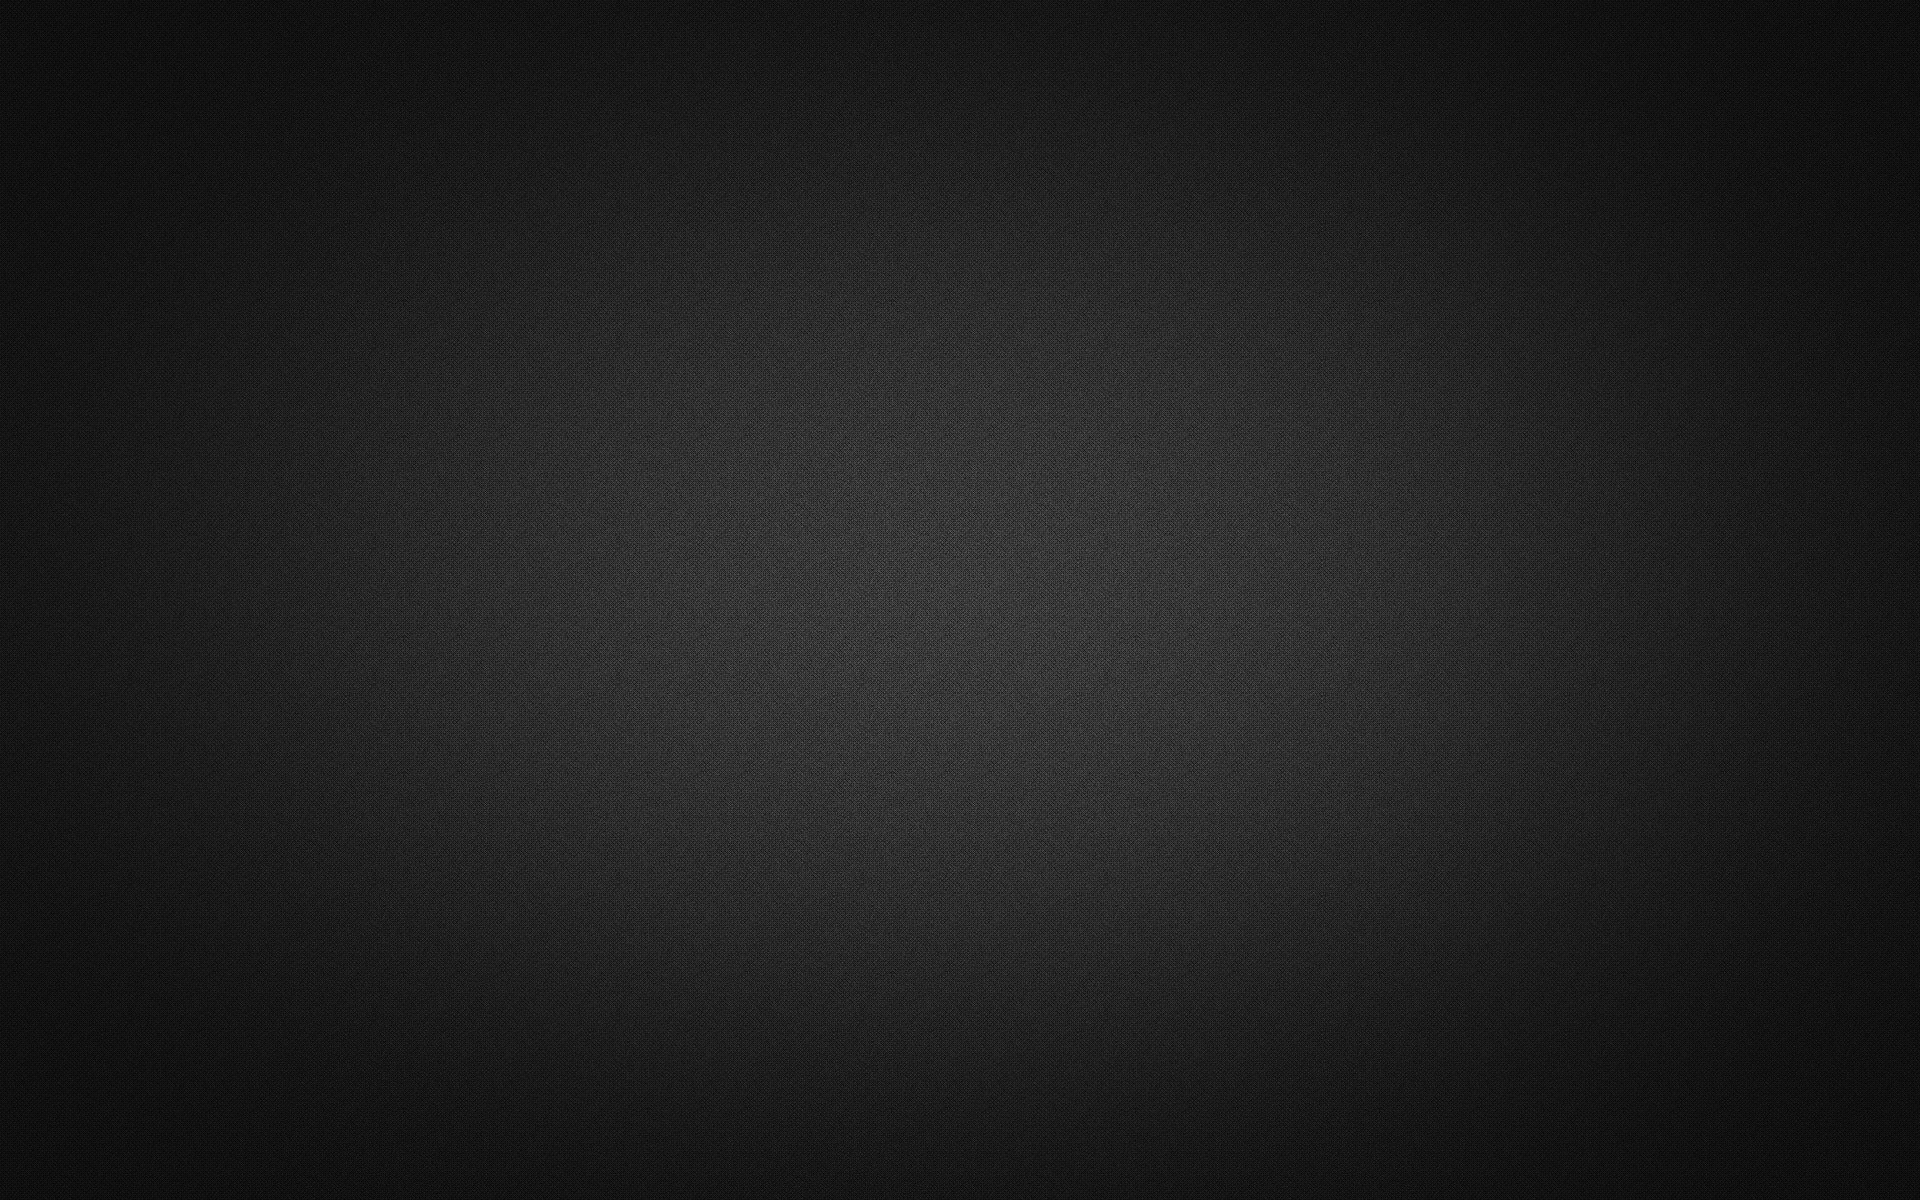 1920x1200 black and grey wallpapers 2015 - Grasscloth Wallpaper